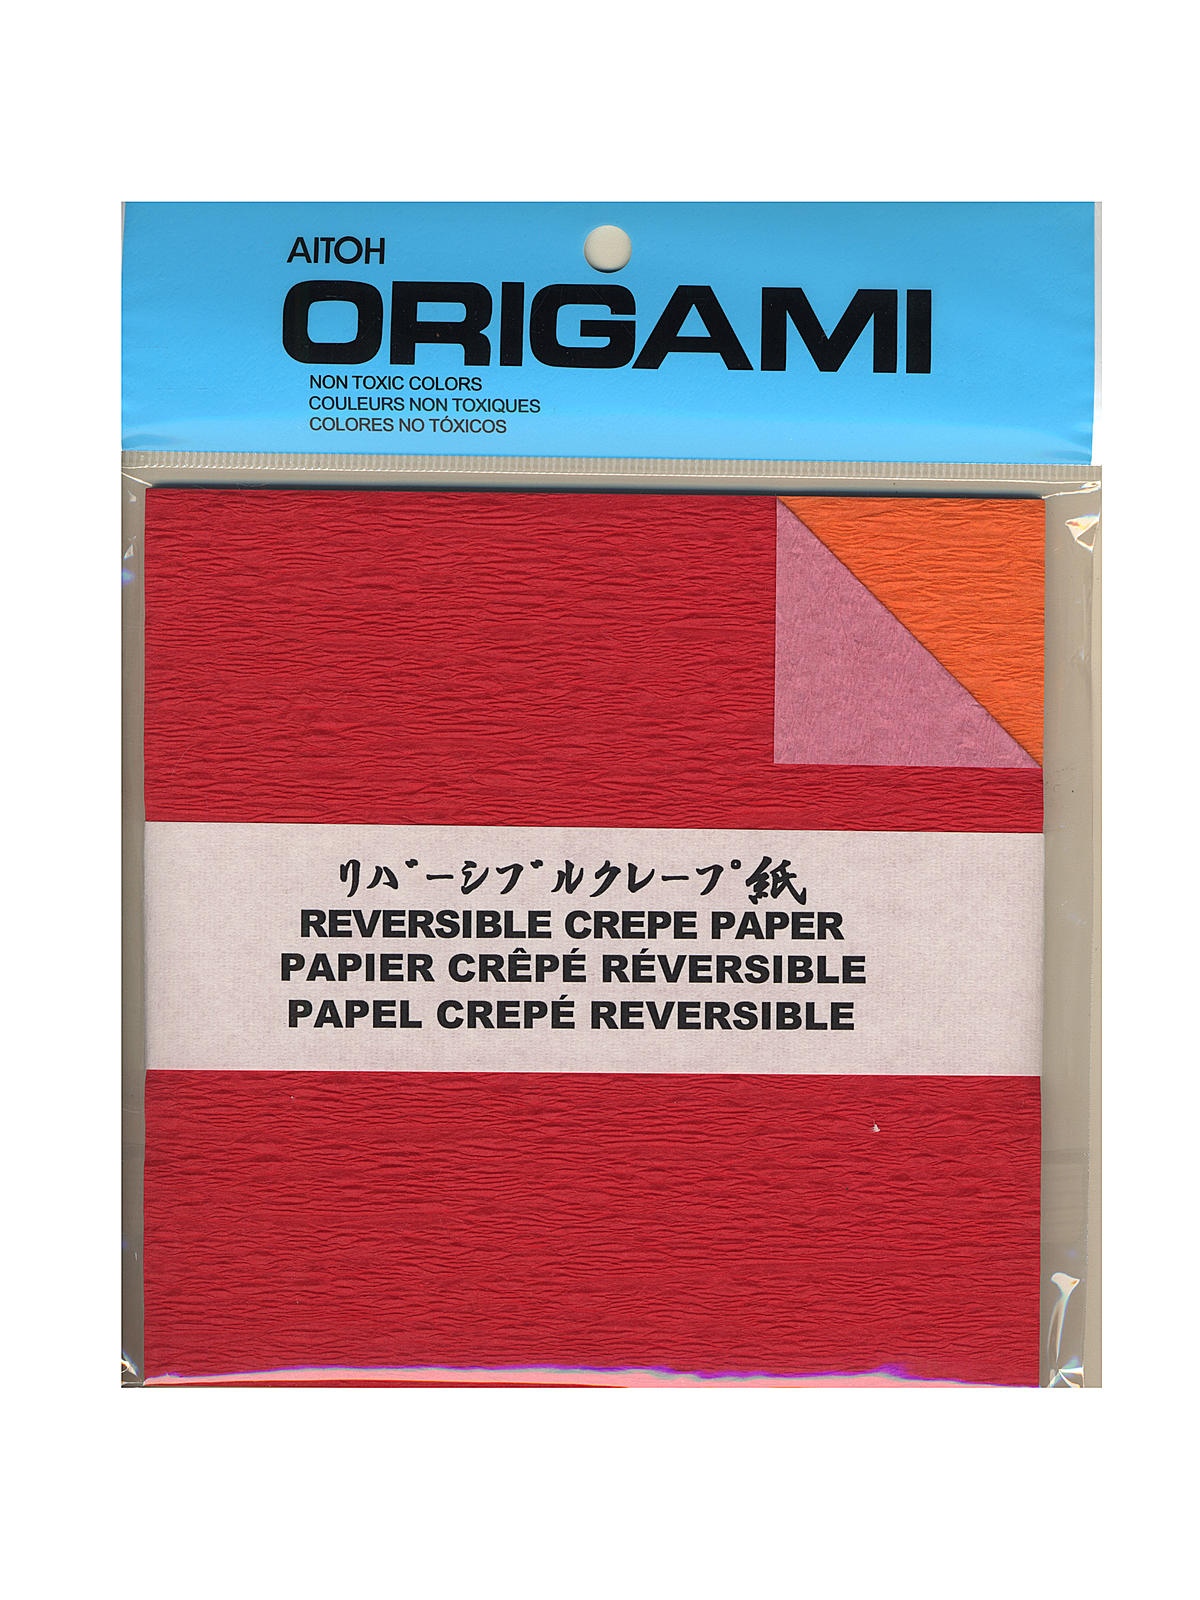 Origami Paper 6 In. X 6 In. Reversible Crepe 24 Sheets